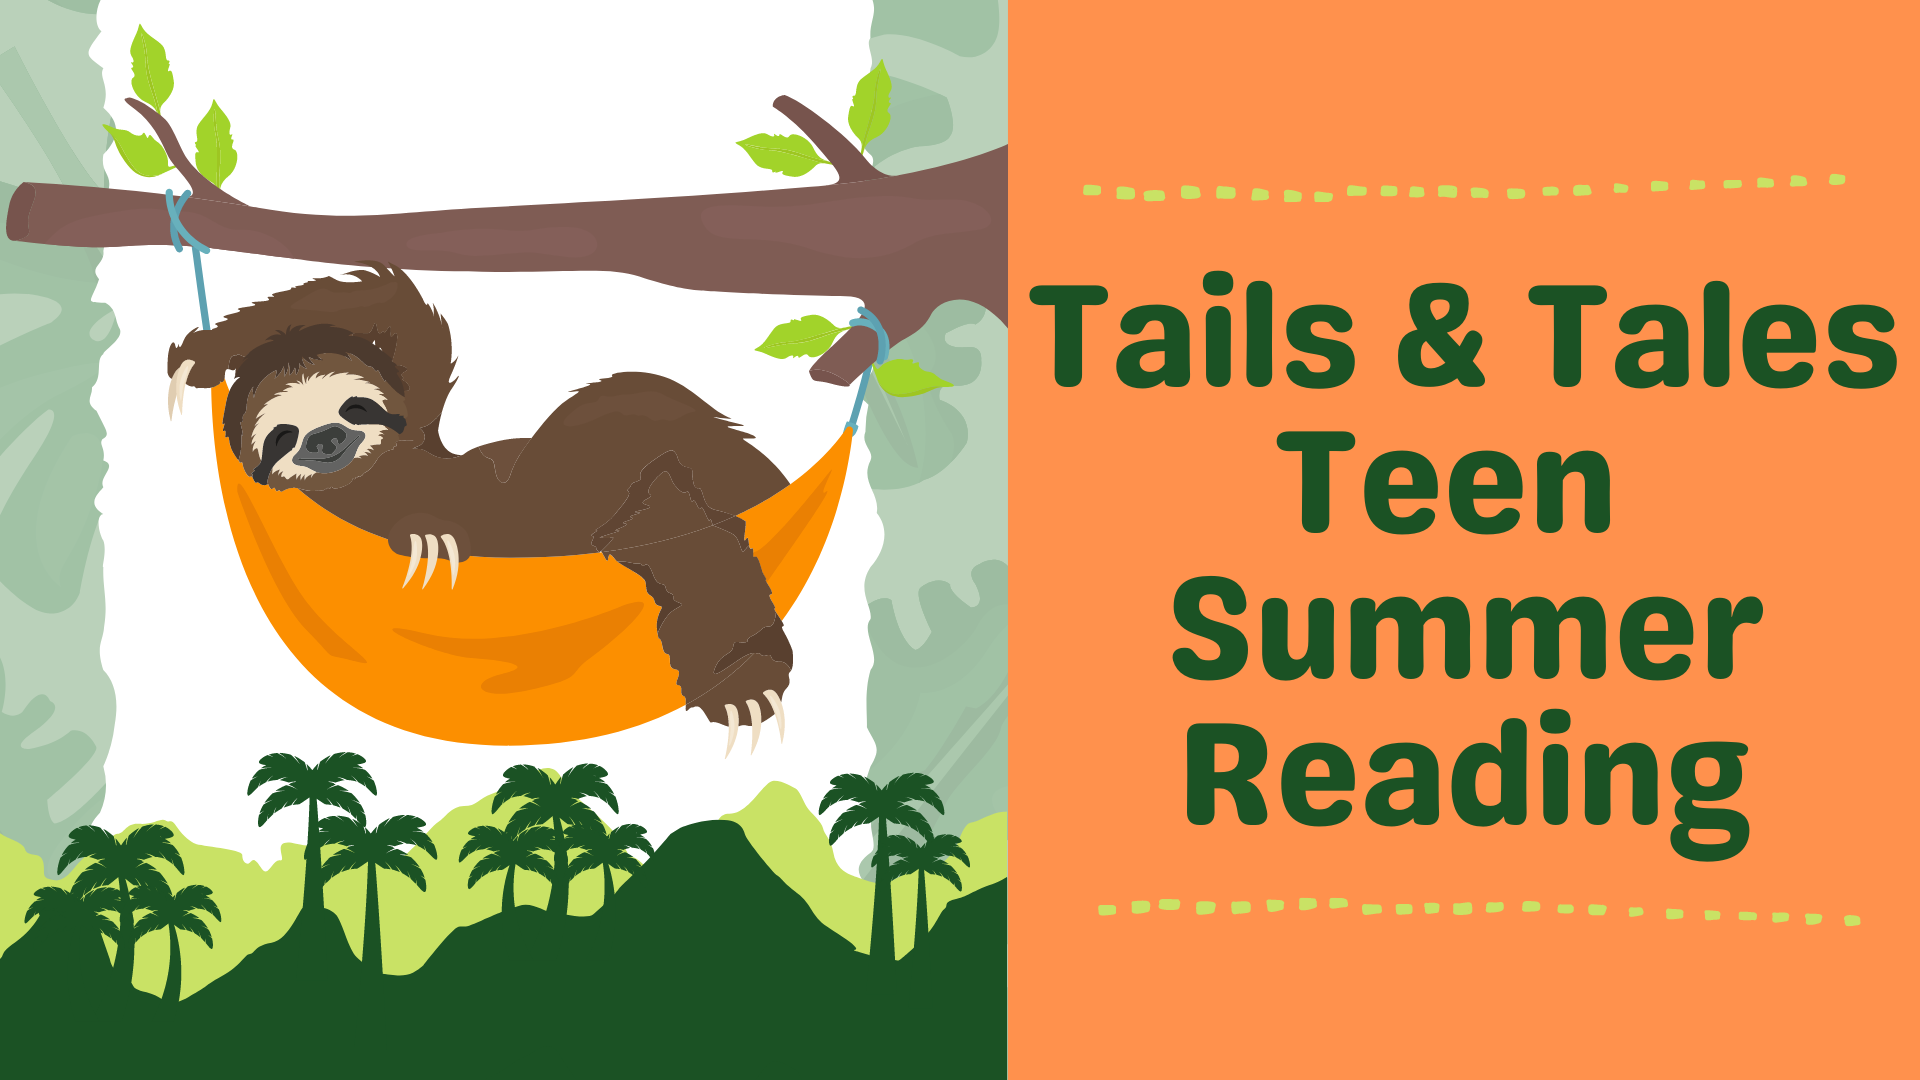 Tails & Tales Teen Summer Reading picture with sloth